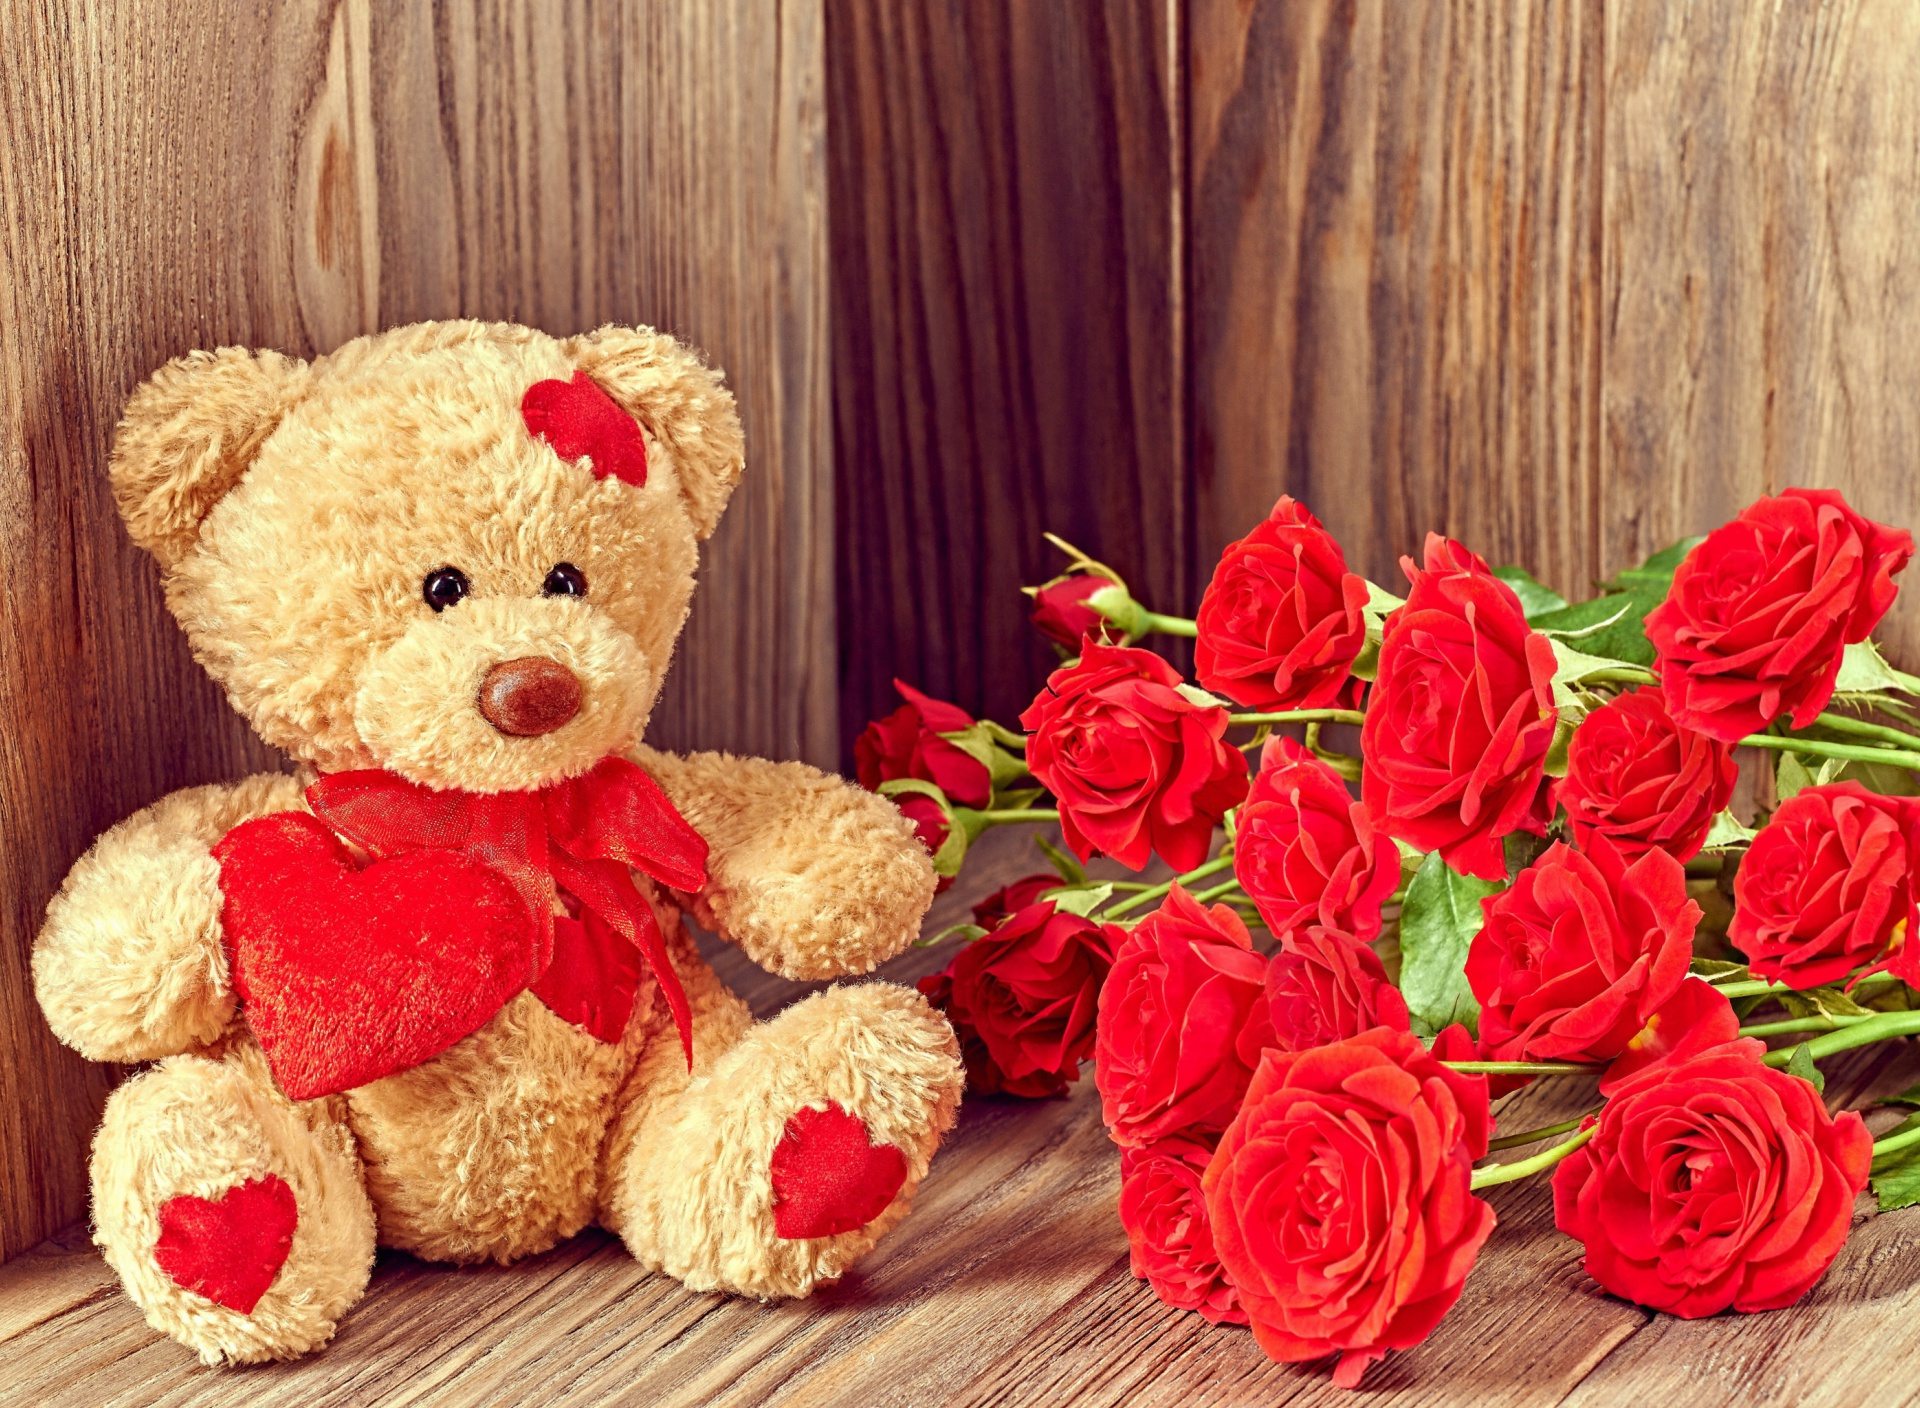 Brodwn Teddy Bear Gift for Saint Valentines Day wallpaper 1920x1408